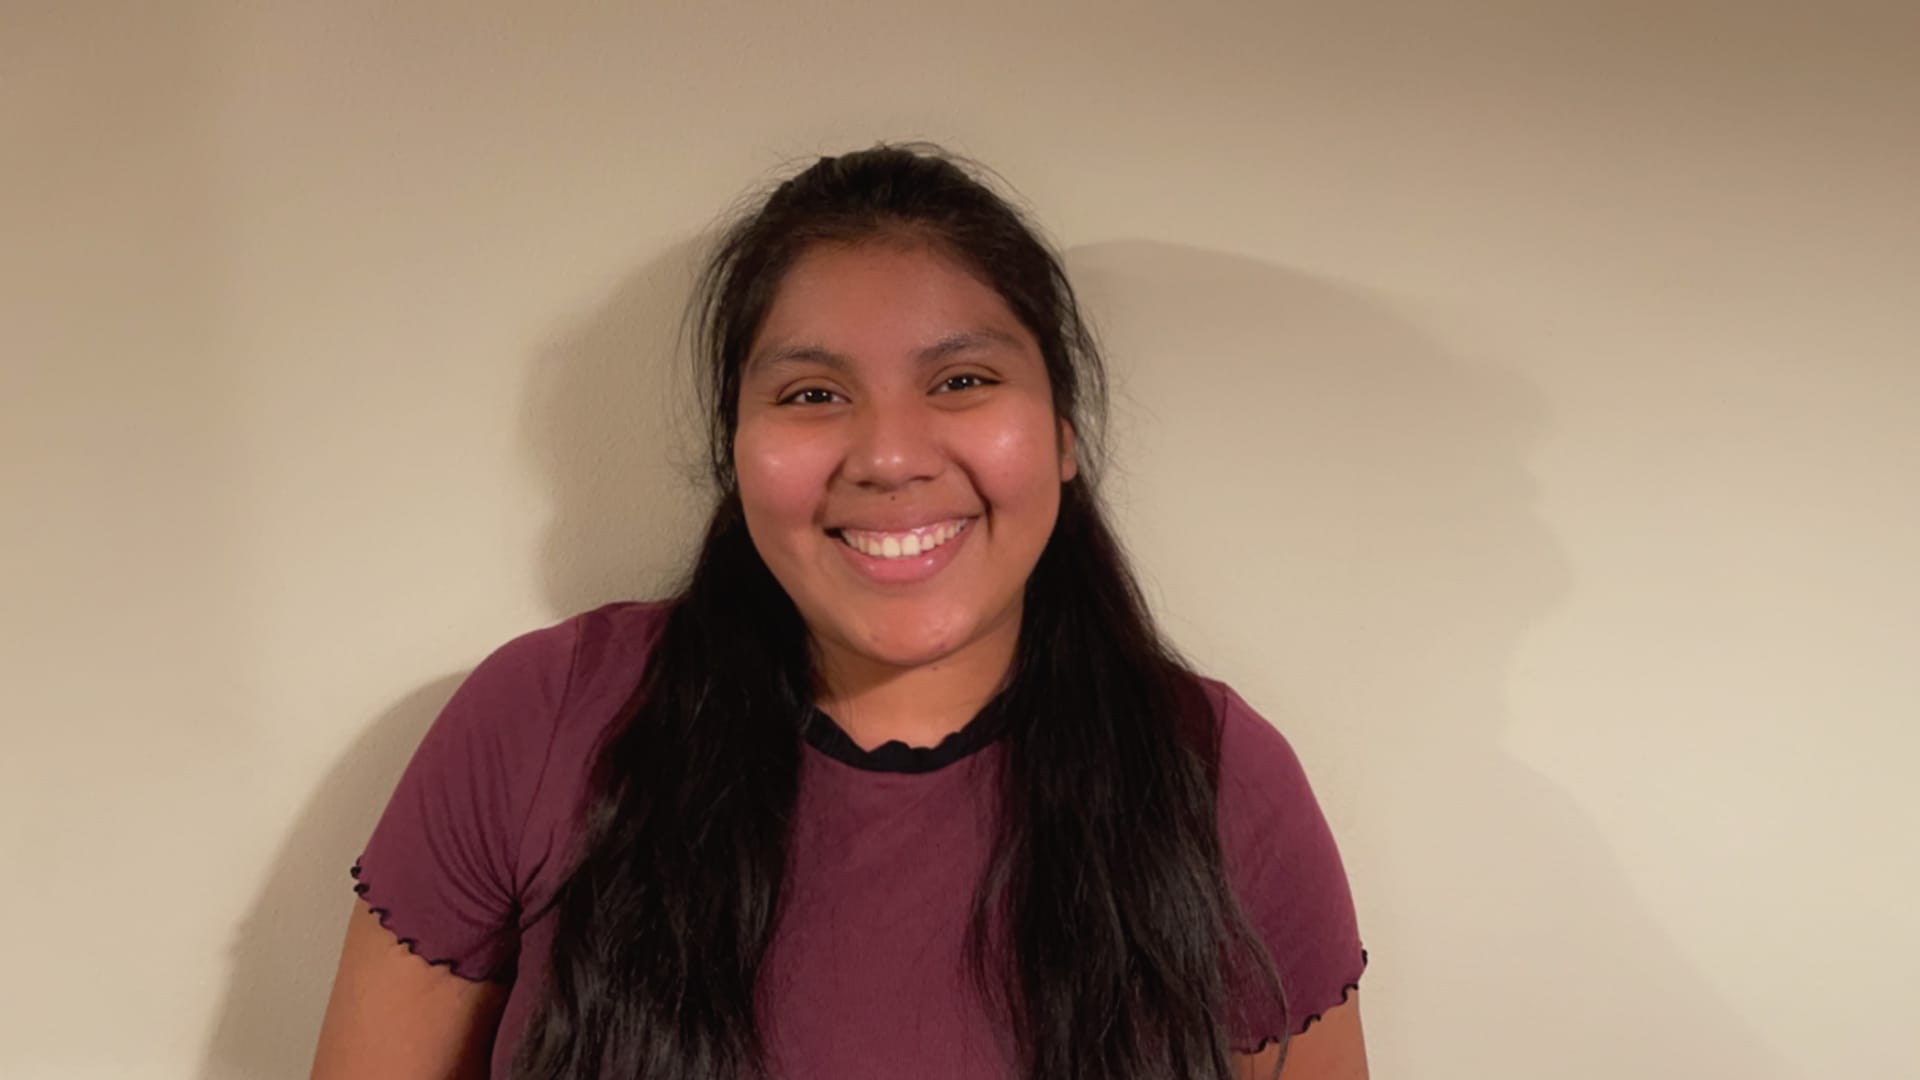 Guillermina Gutierrez Martinez, a senior at the University of Washington Seattle, took time off during the pandemic but is now enrolled and working for the university.